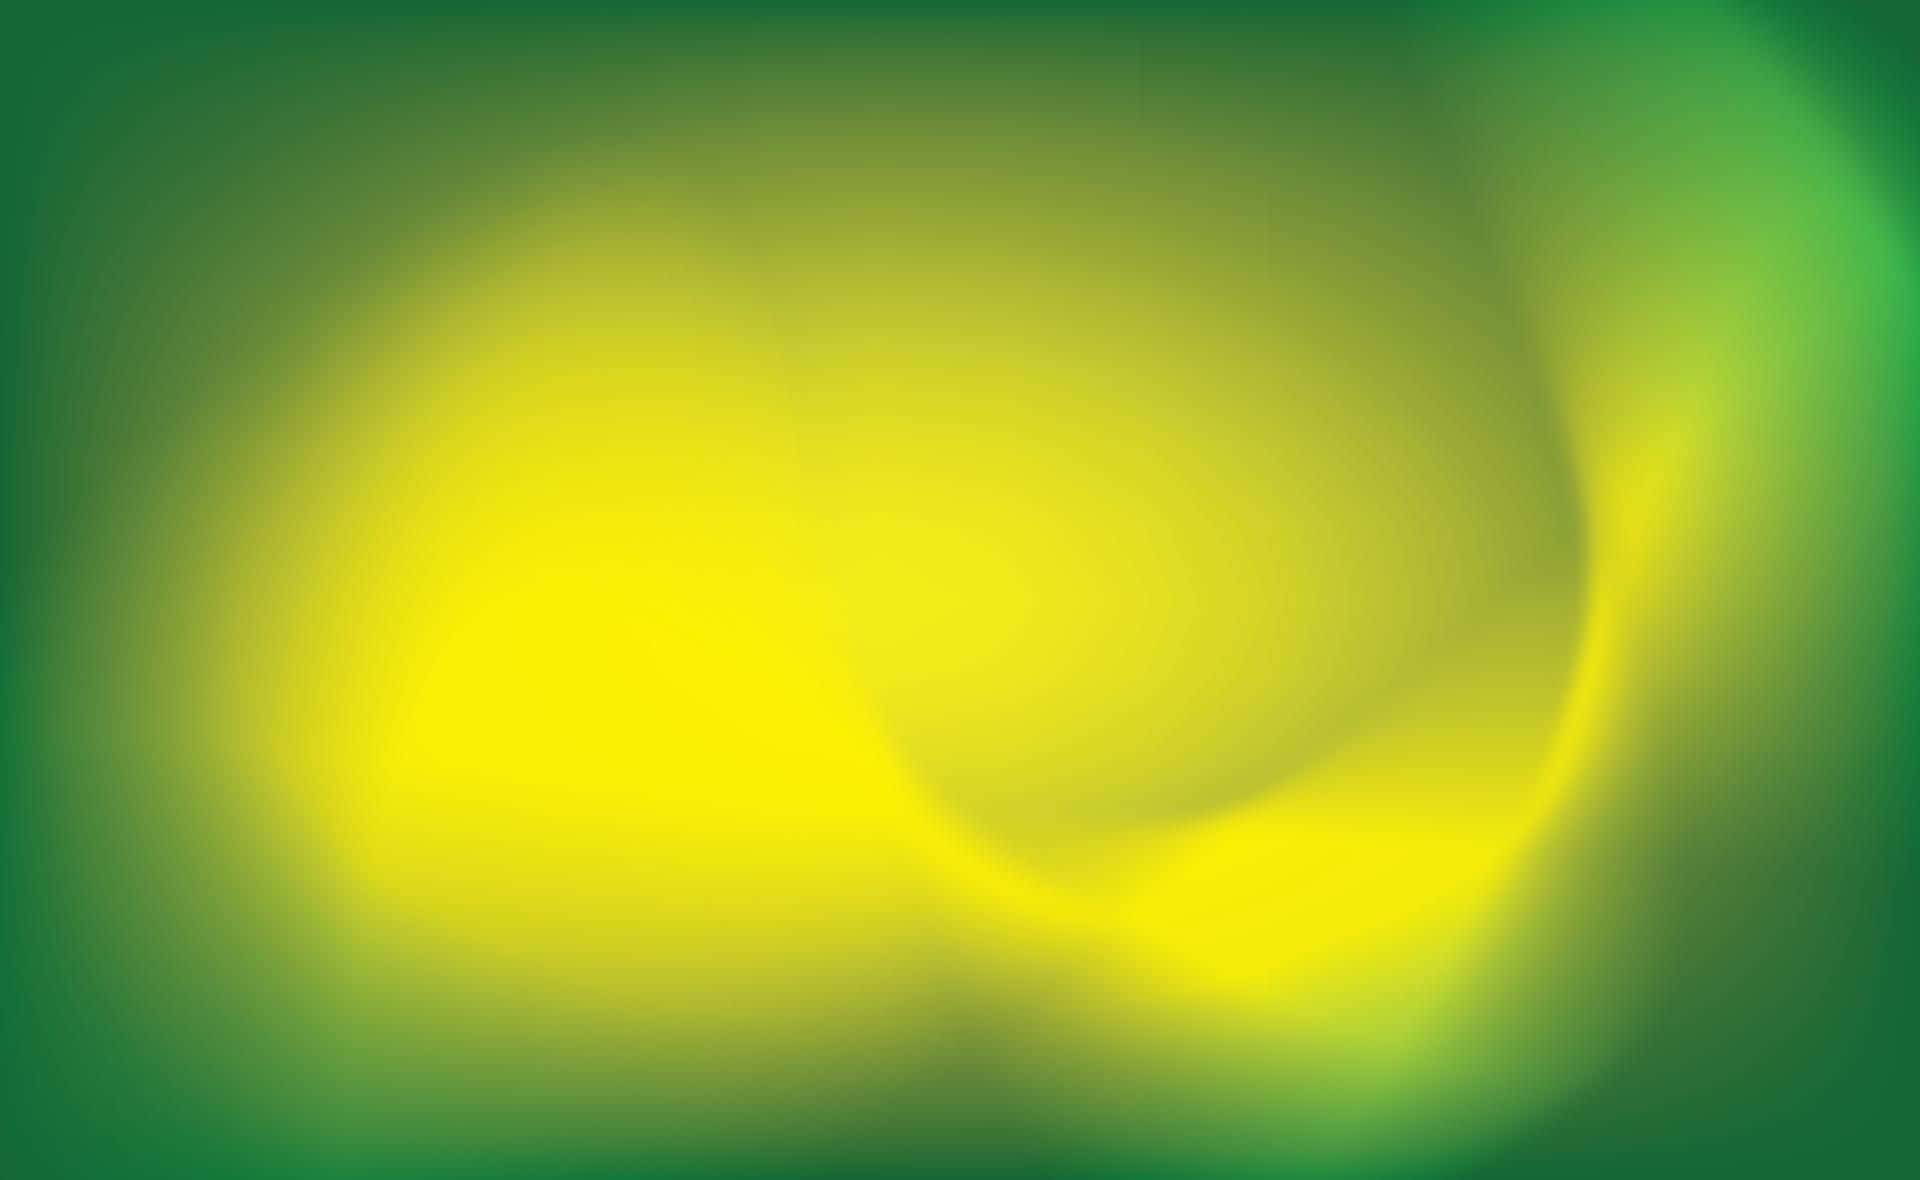 Natural Abstraction - A Vibrant Blend of Green and Yellow